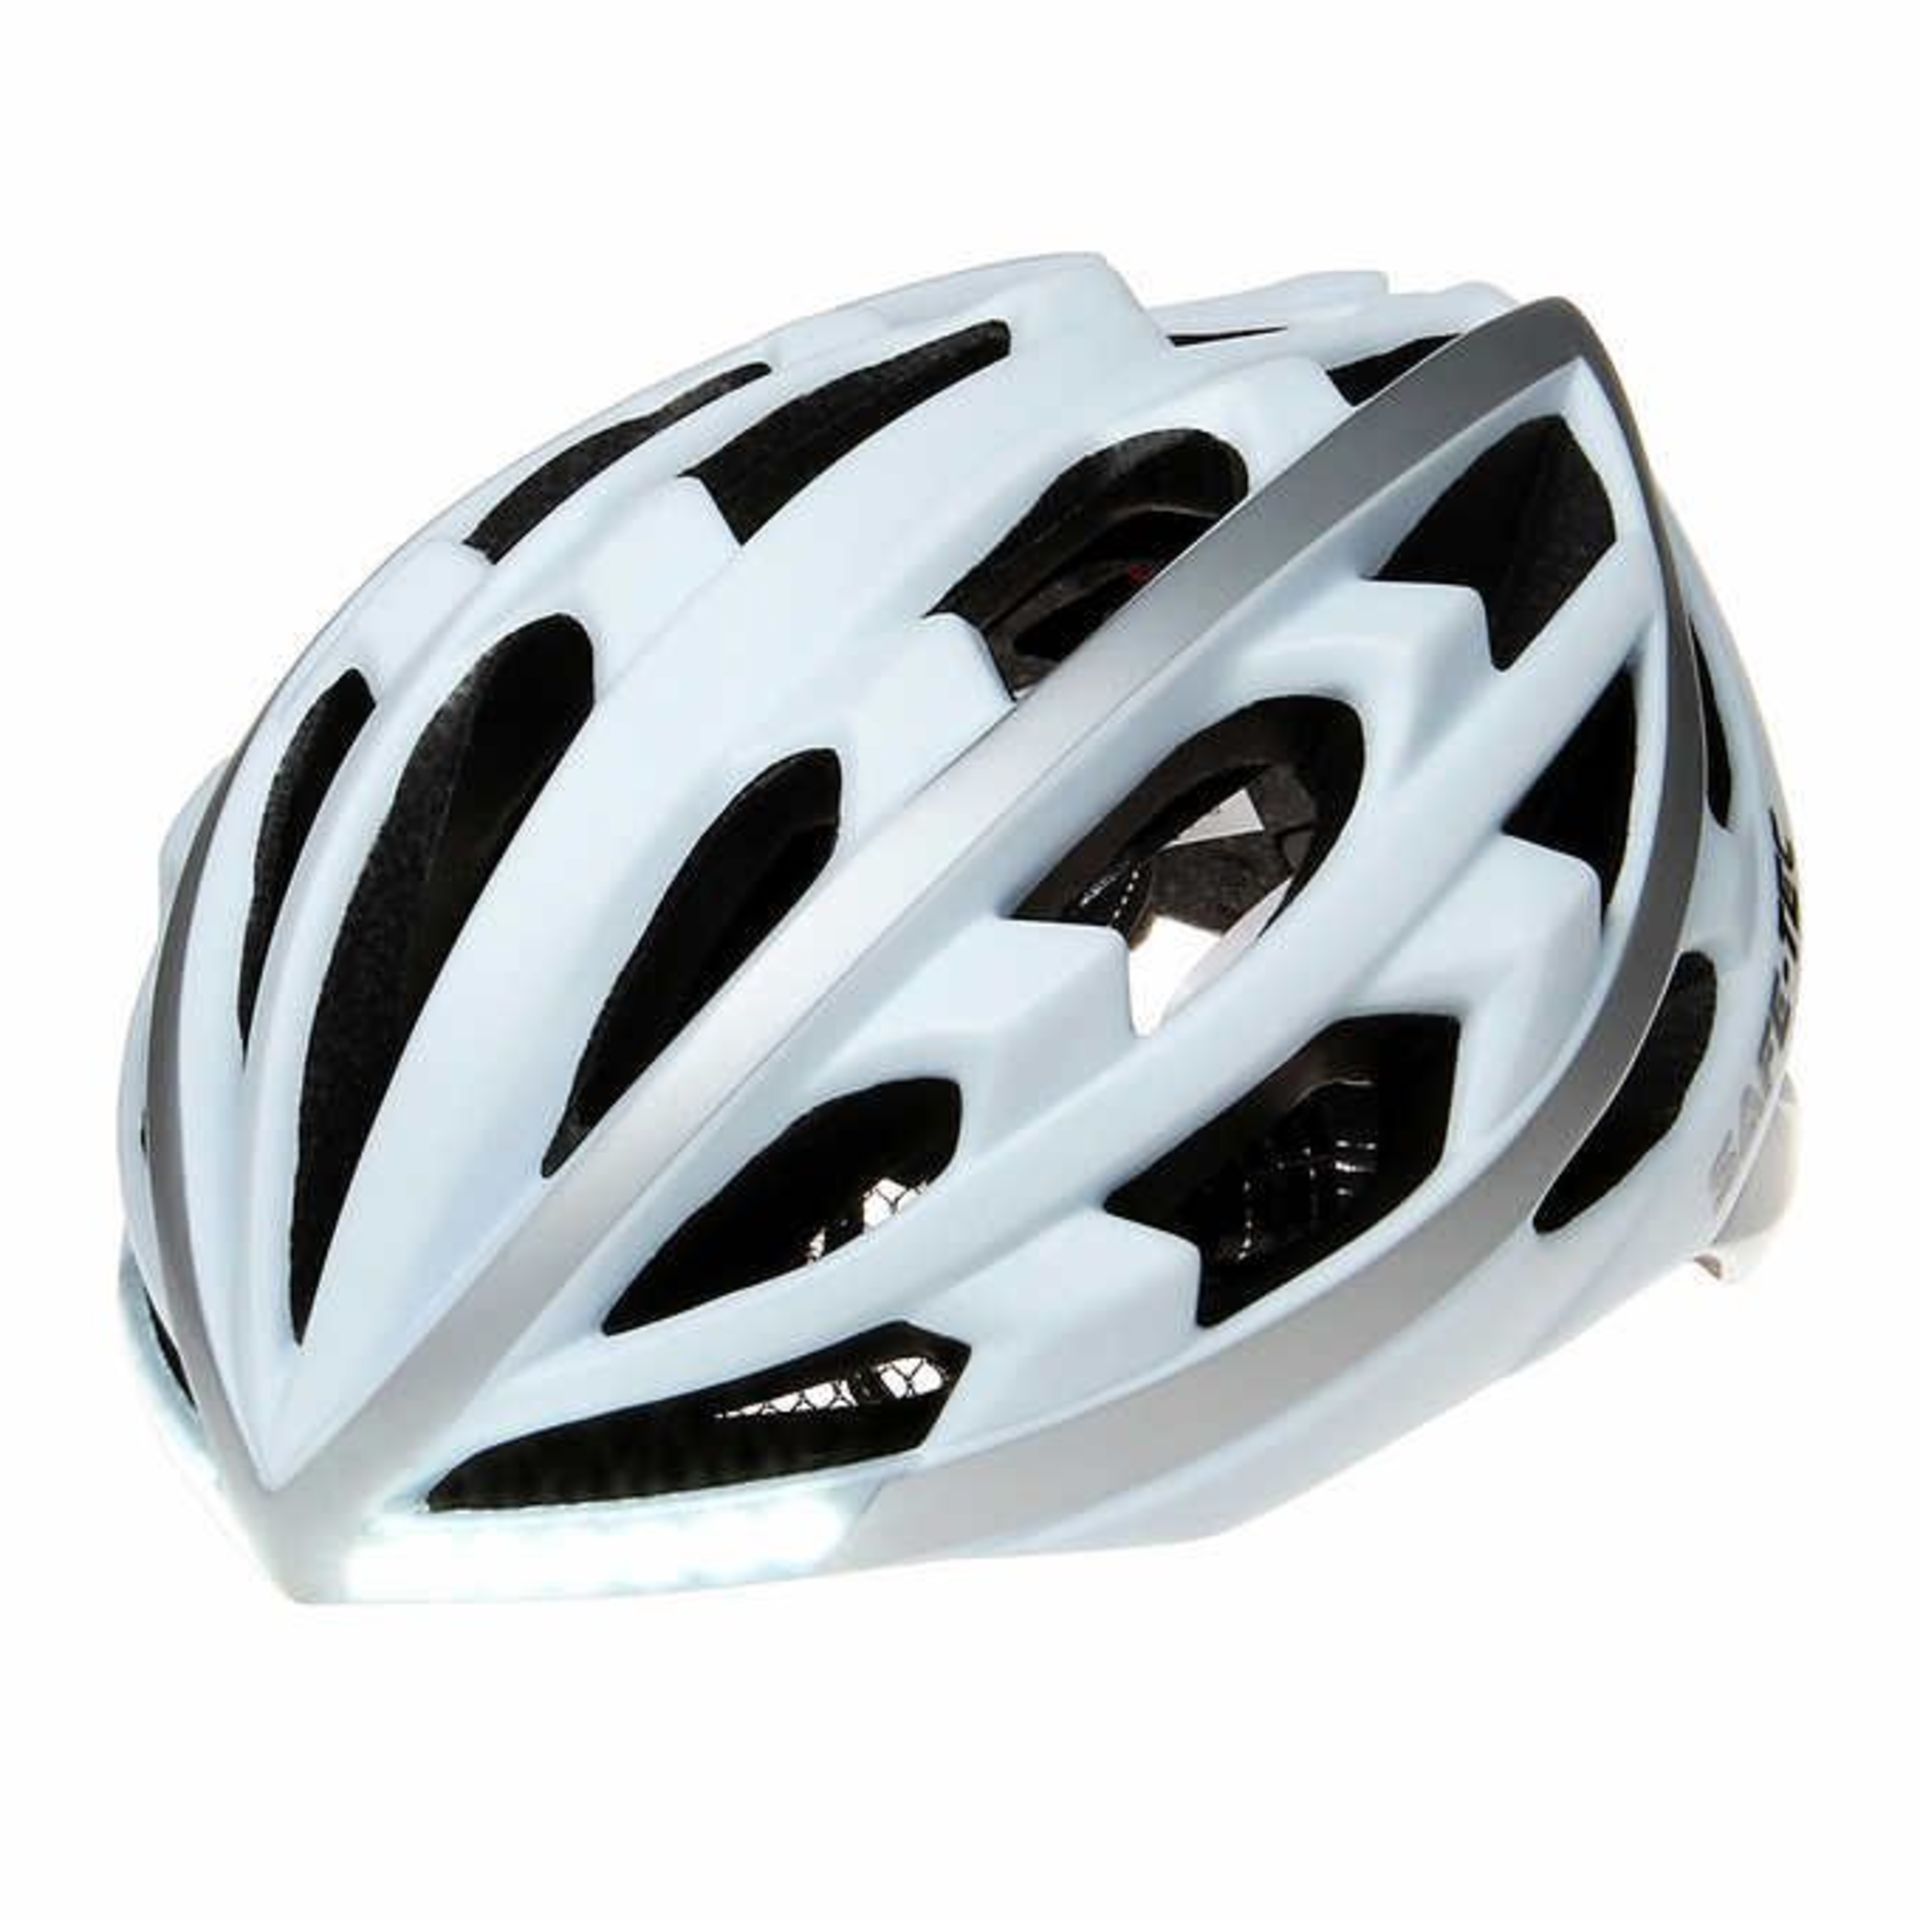 SAFE-TEC WHITE/SILVER BICYCLE HELMET (LARGE) C/W BLUETOOTH SPEAKERS & LIGHTS (NEW) (MSRP $150) - Image 3 of 8